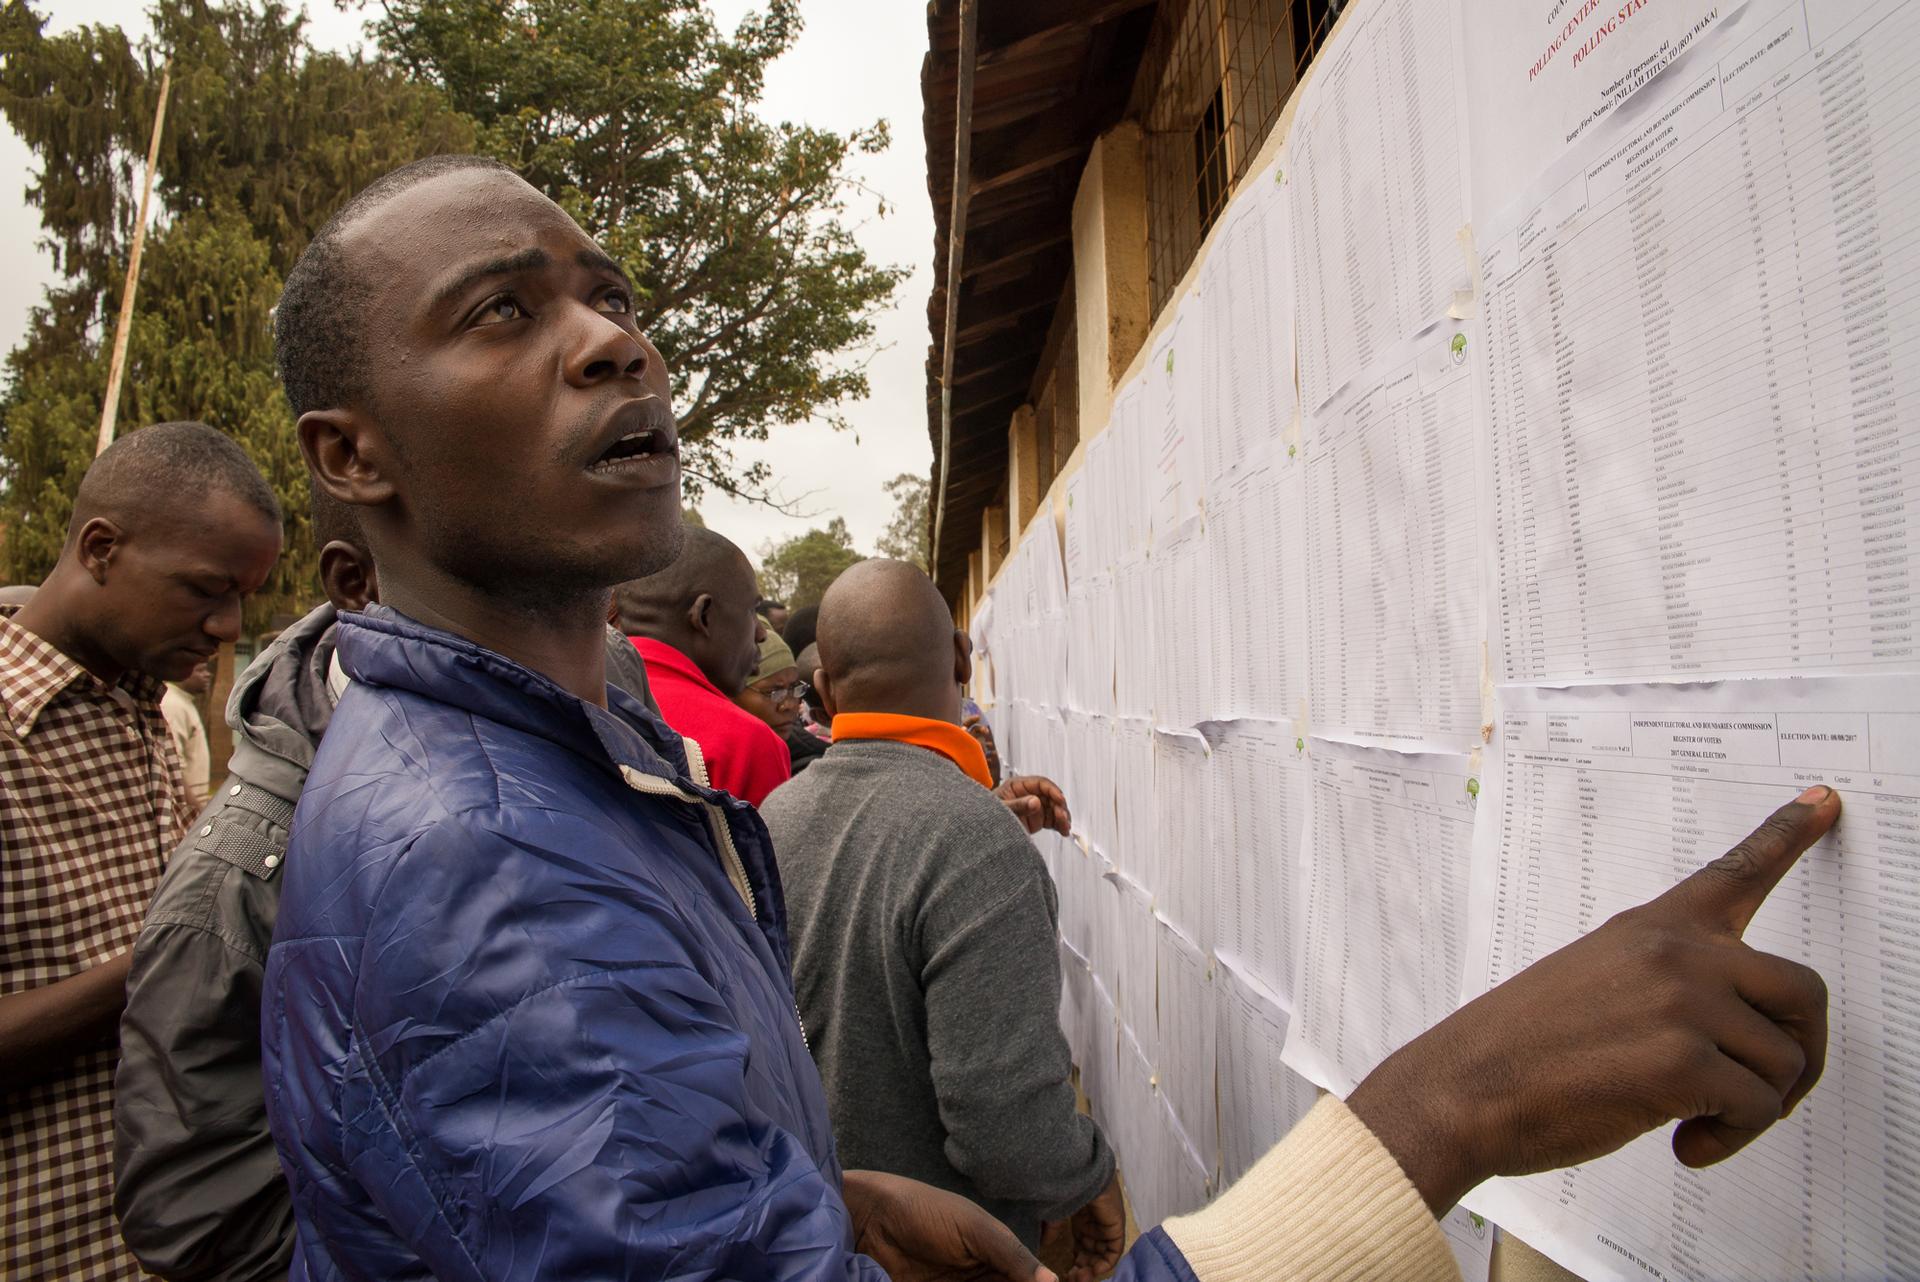 A man from an informal settlement in Nairobi searches for his name on a voter registration list at Kibera Primary School. Some voters were unable to locate their names on the registrar, forcing them to contact election officials for assistance.